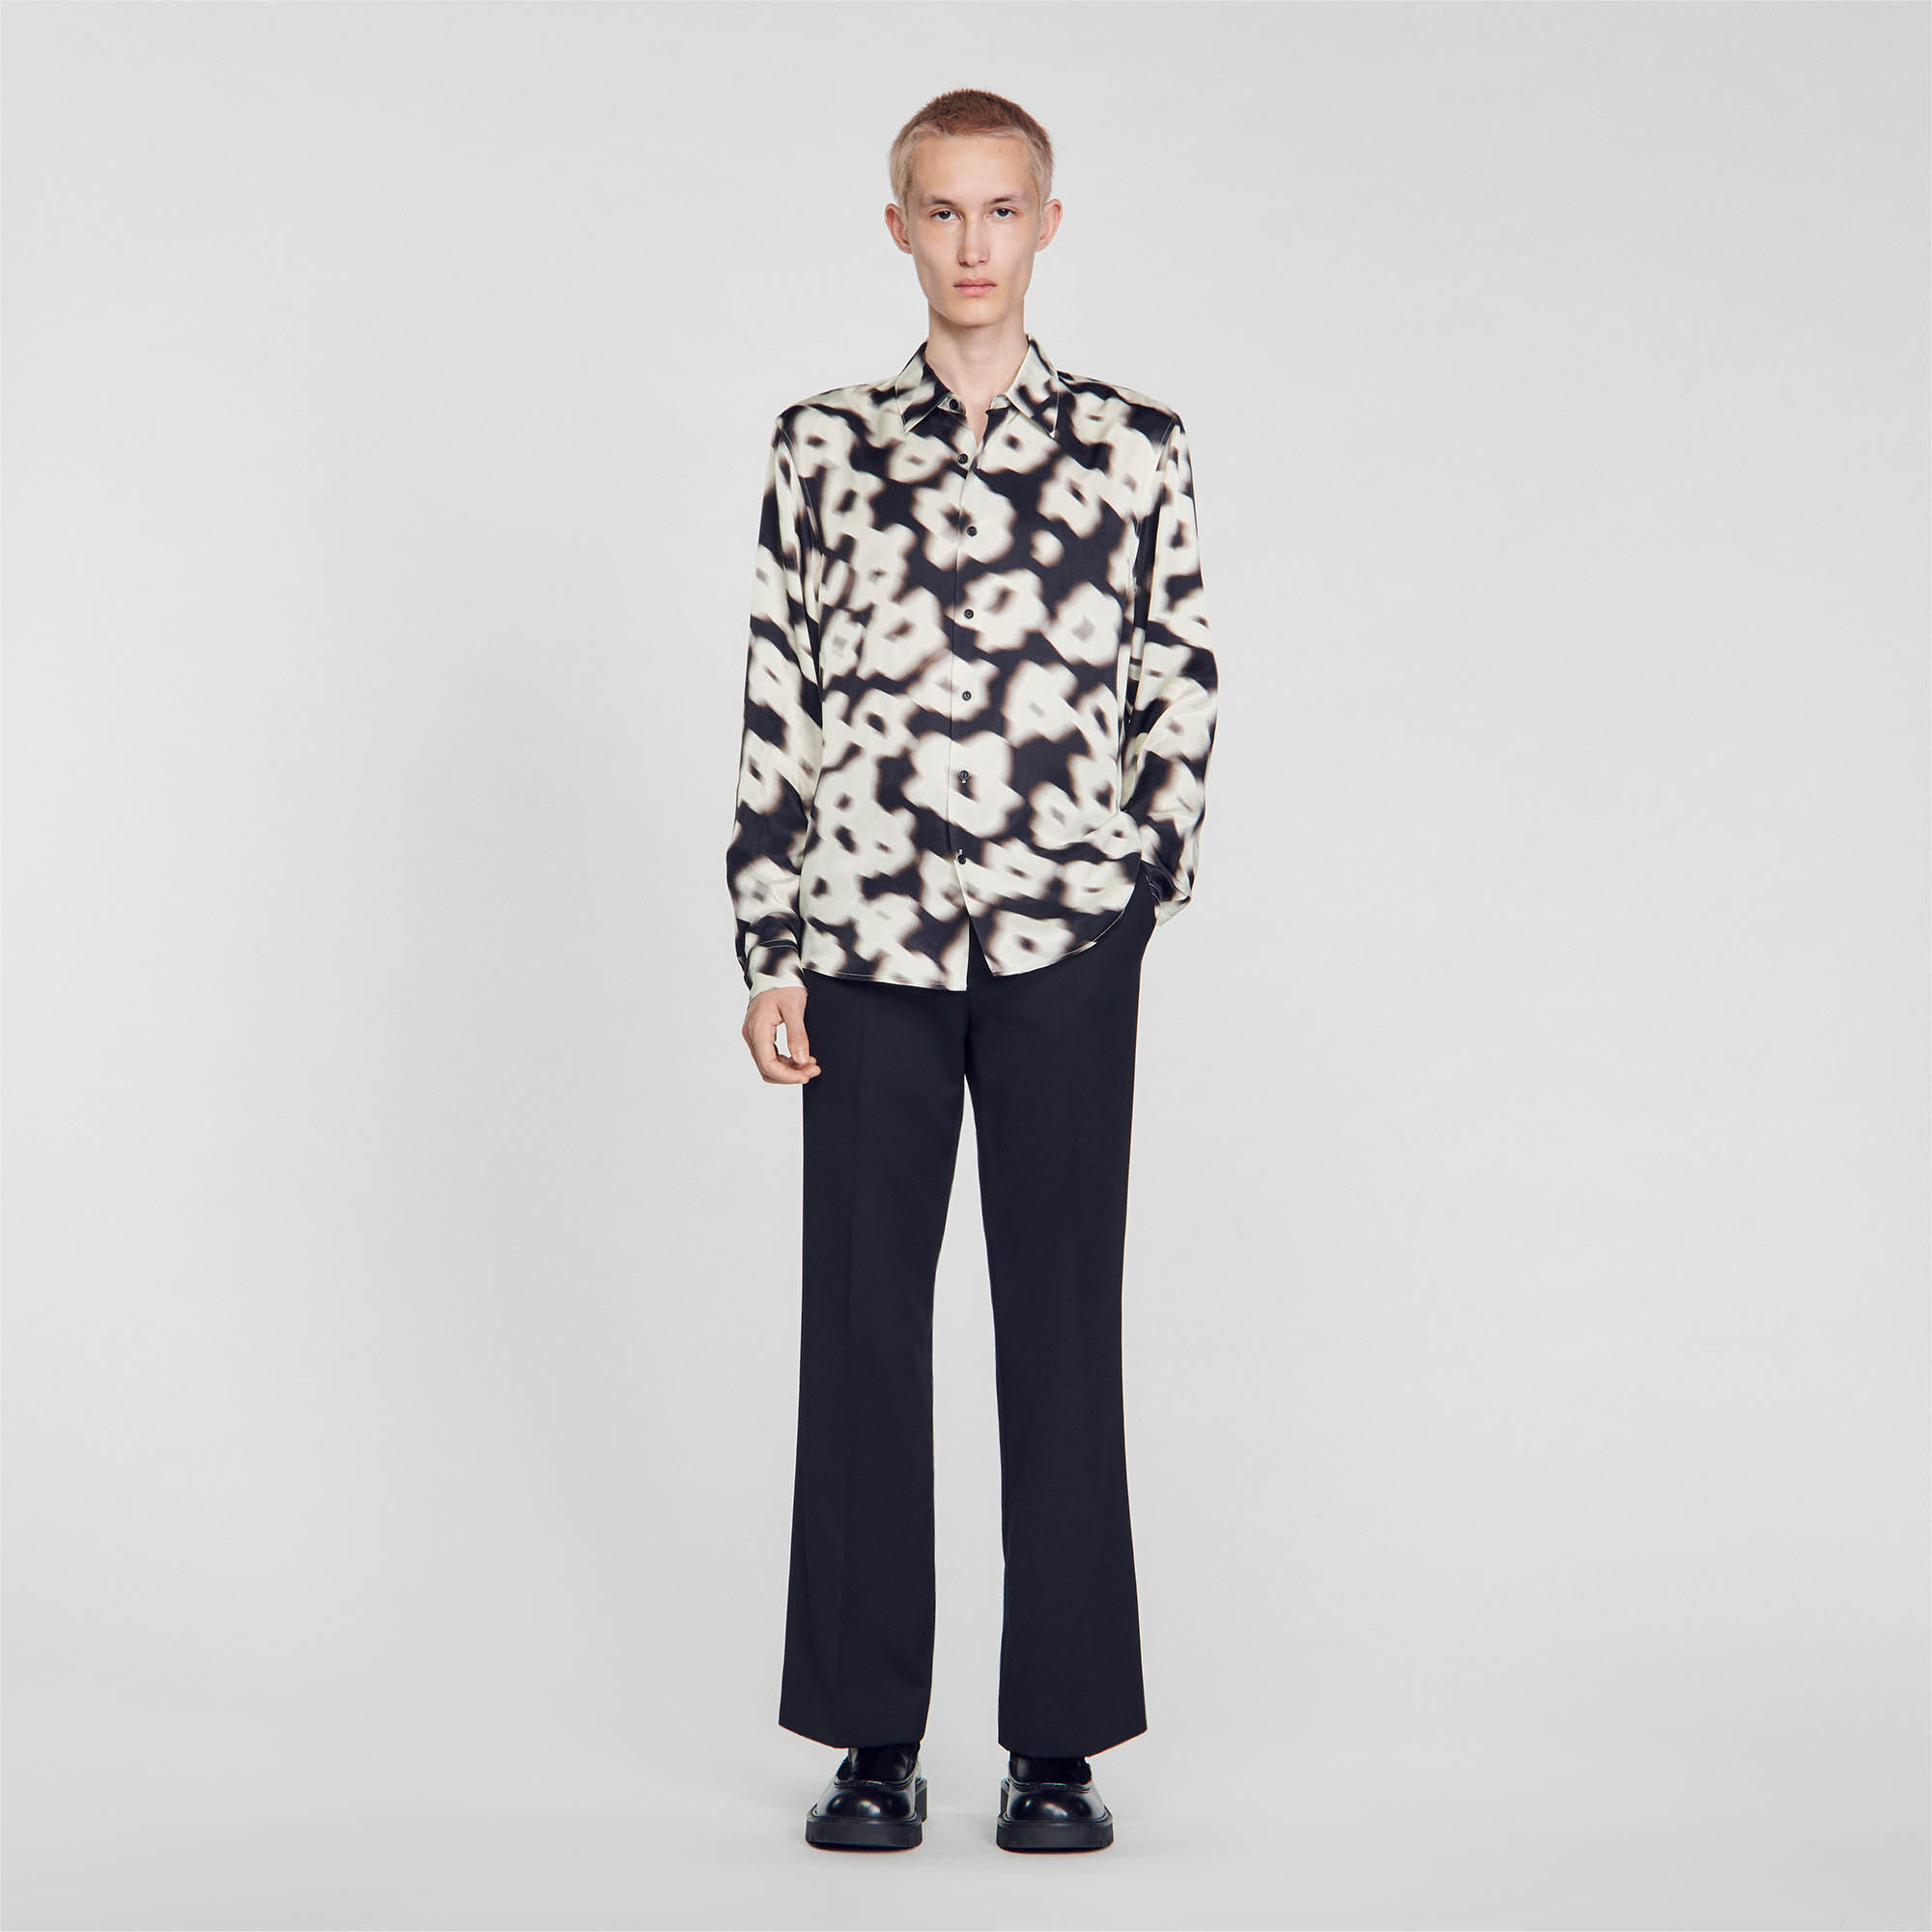 Sandro viscose Loose shirt with a collar, long sleeves and button fastening